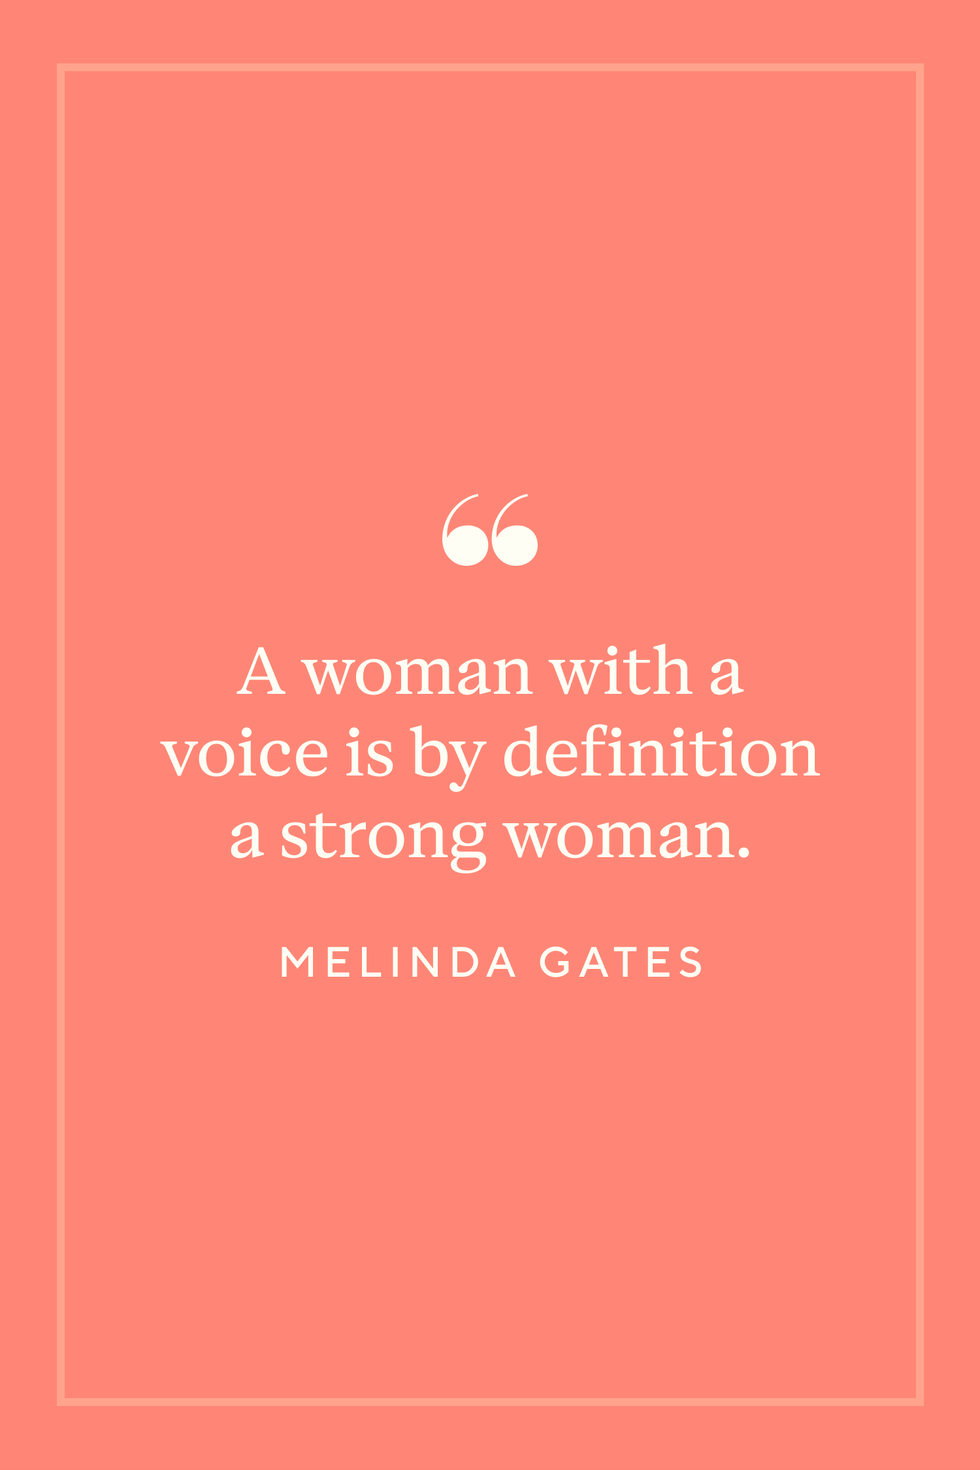 What makes a woman strong?